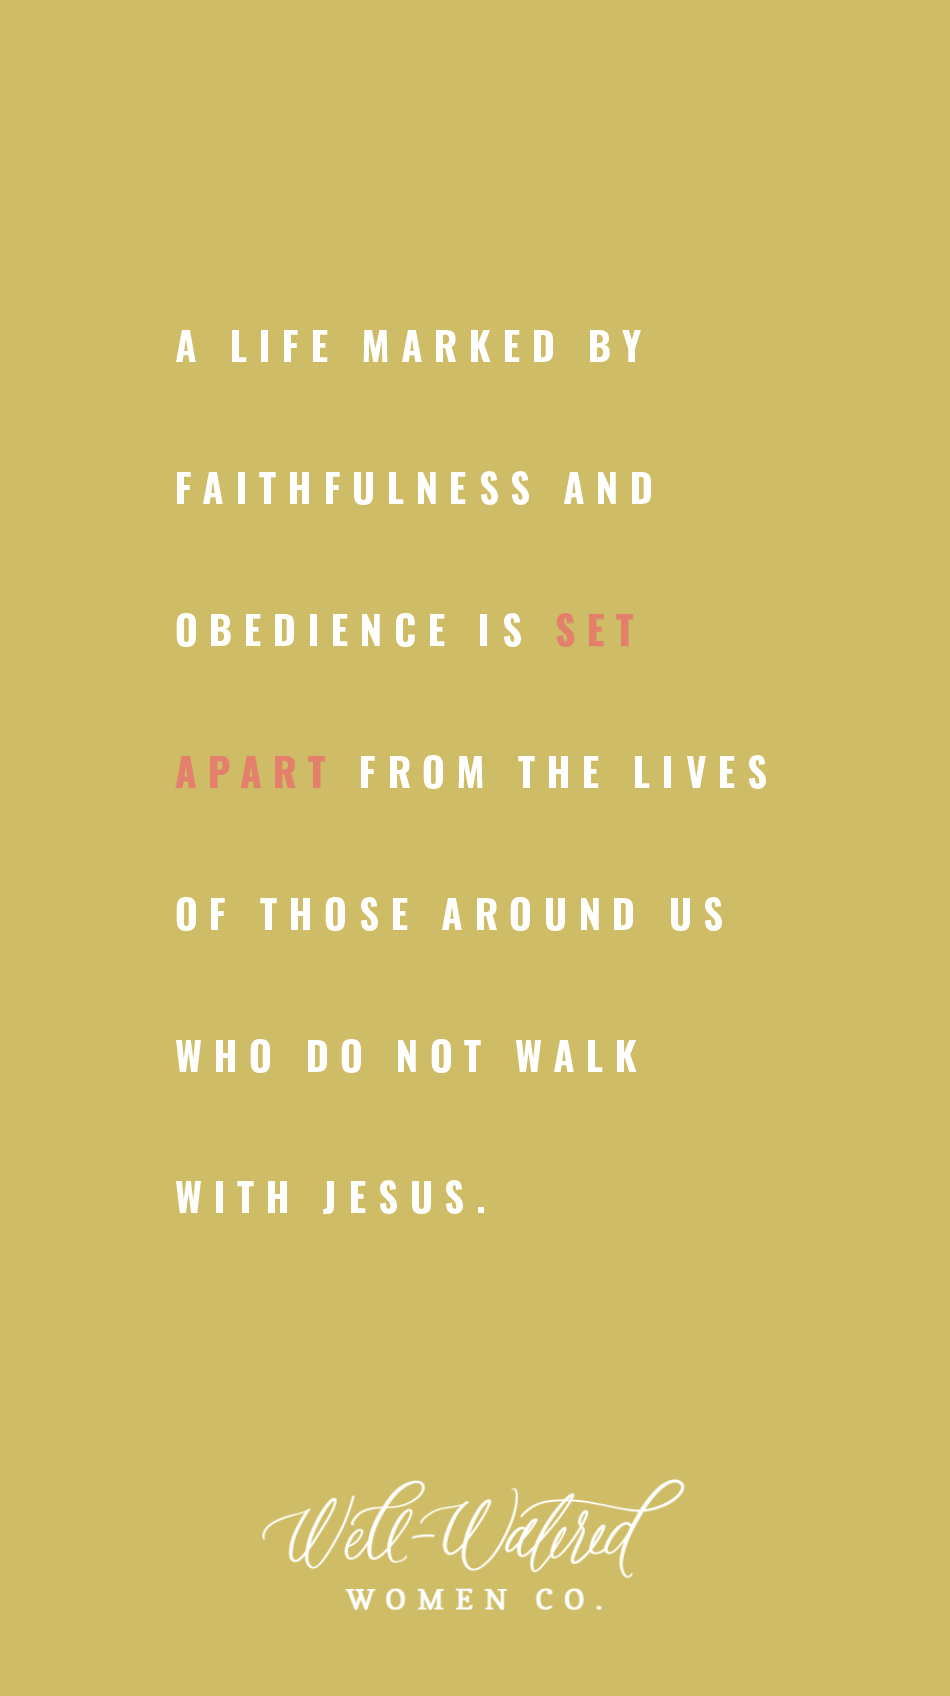 The call to faithfulness goes hand in hand with the call to obedience. A life marked by faithfulness and obedience is set apart from the lives of those around us who do not walk with Jesus.